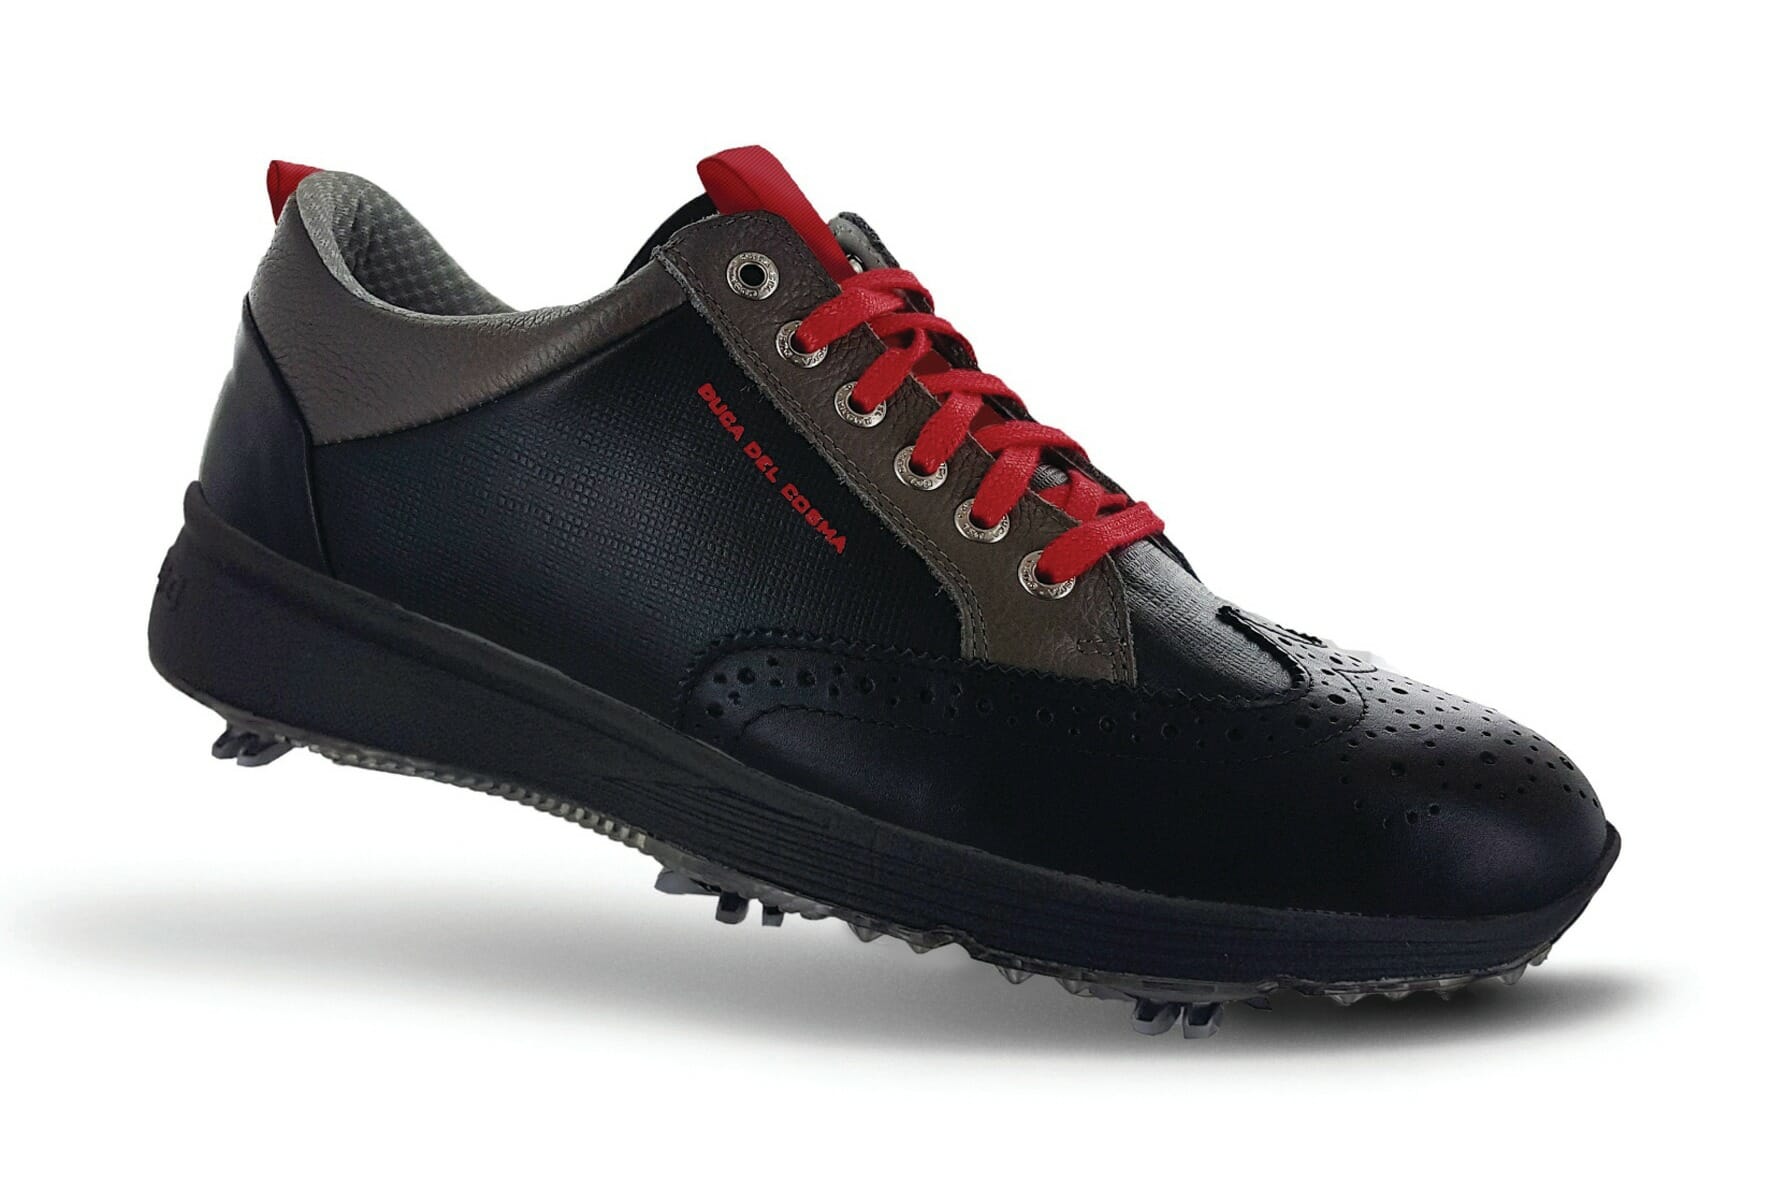 Duca Del Cosma release its first spiked golf shoe models